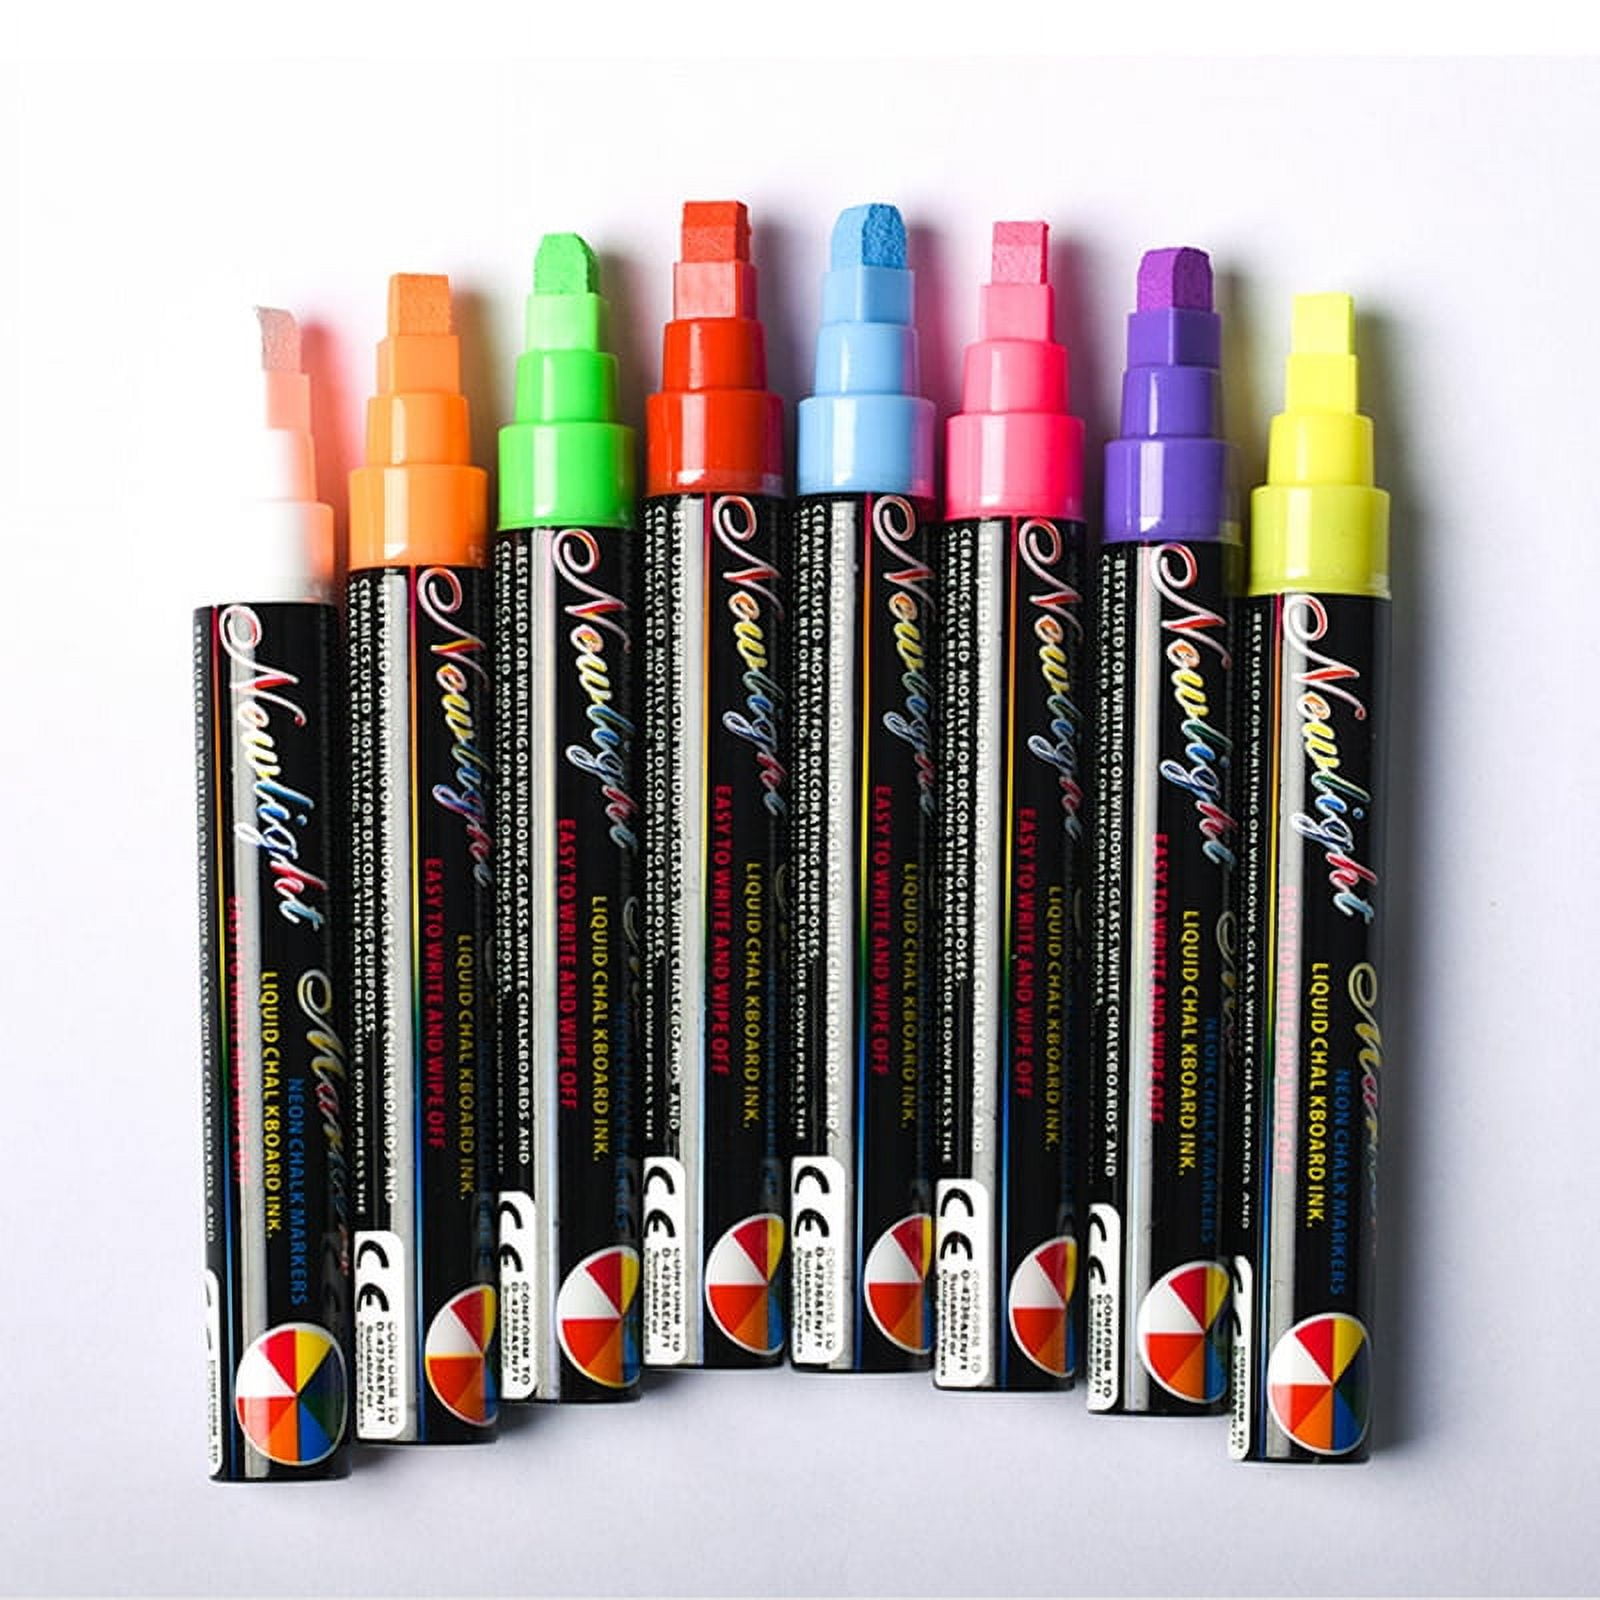 Best chalk markers to use on blackboards, glass and ceramics in